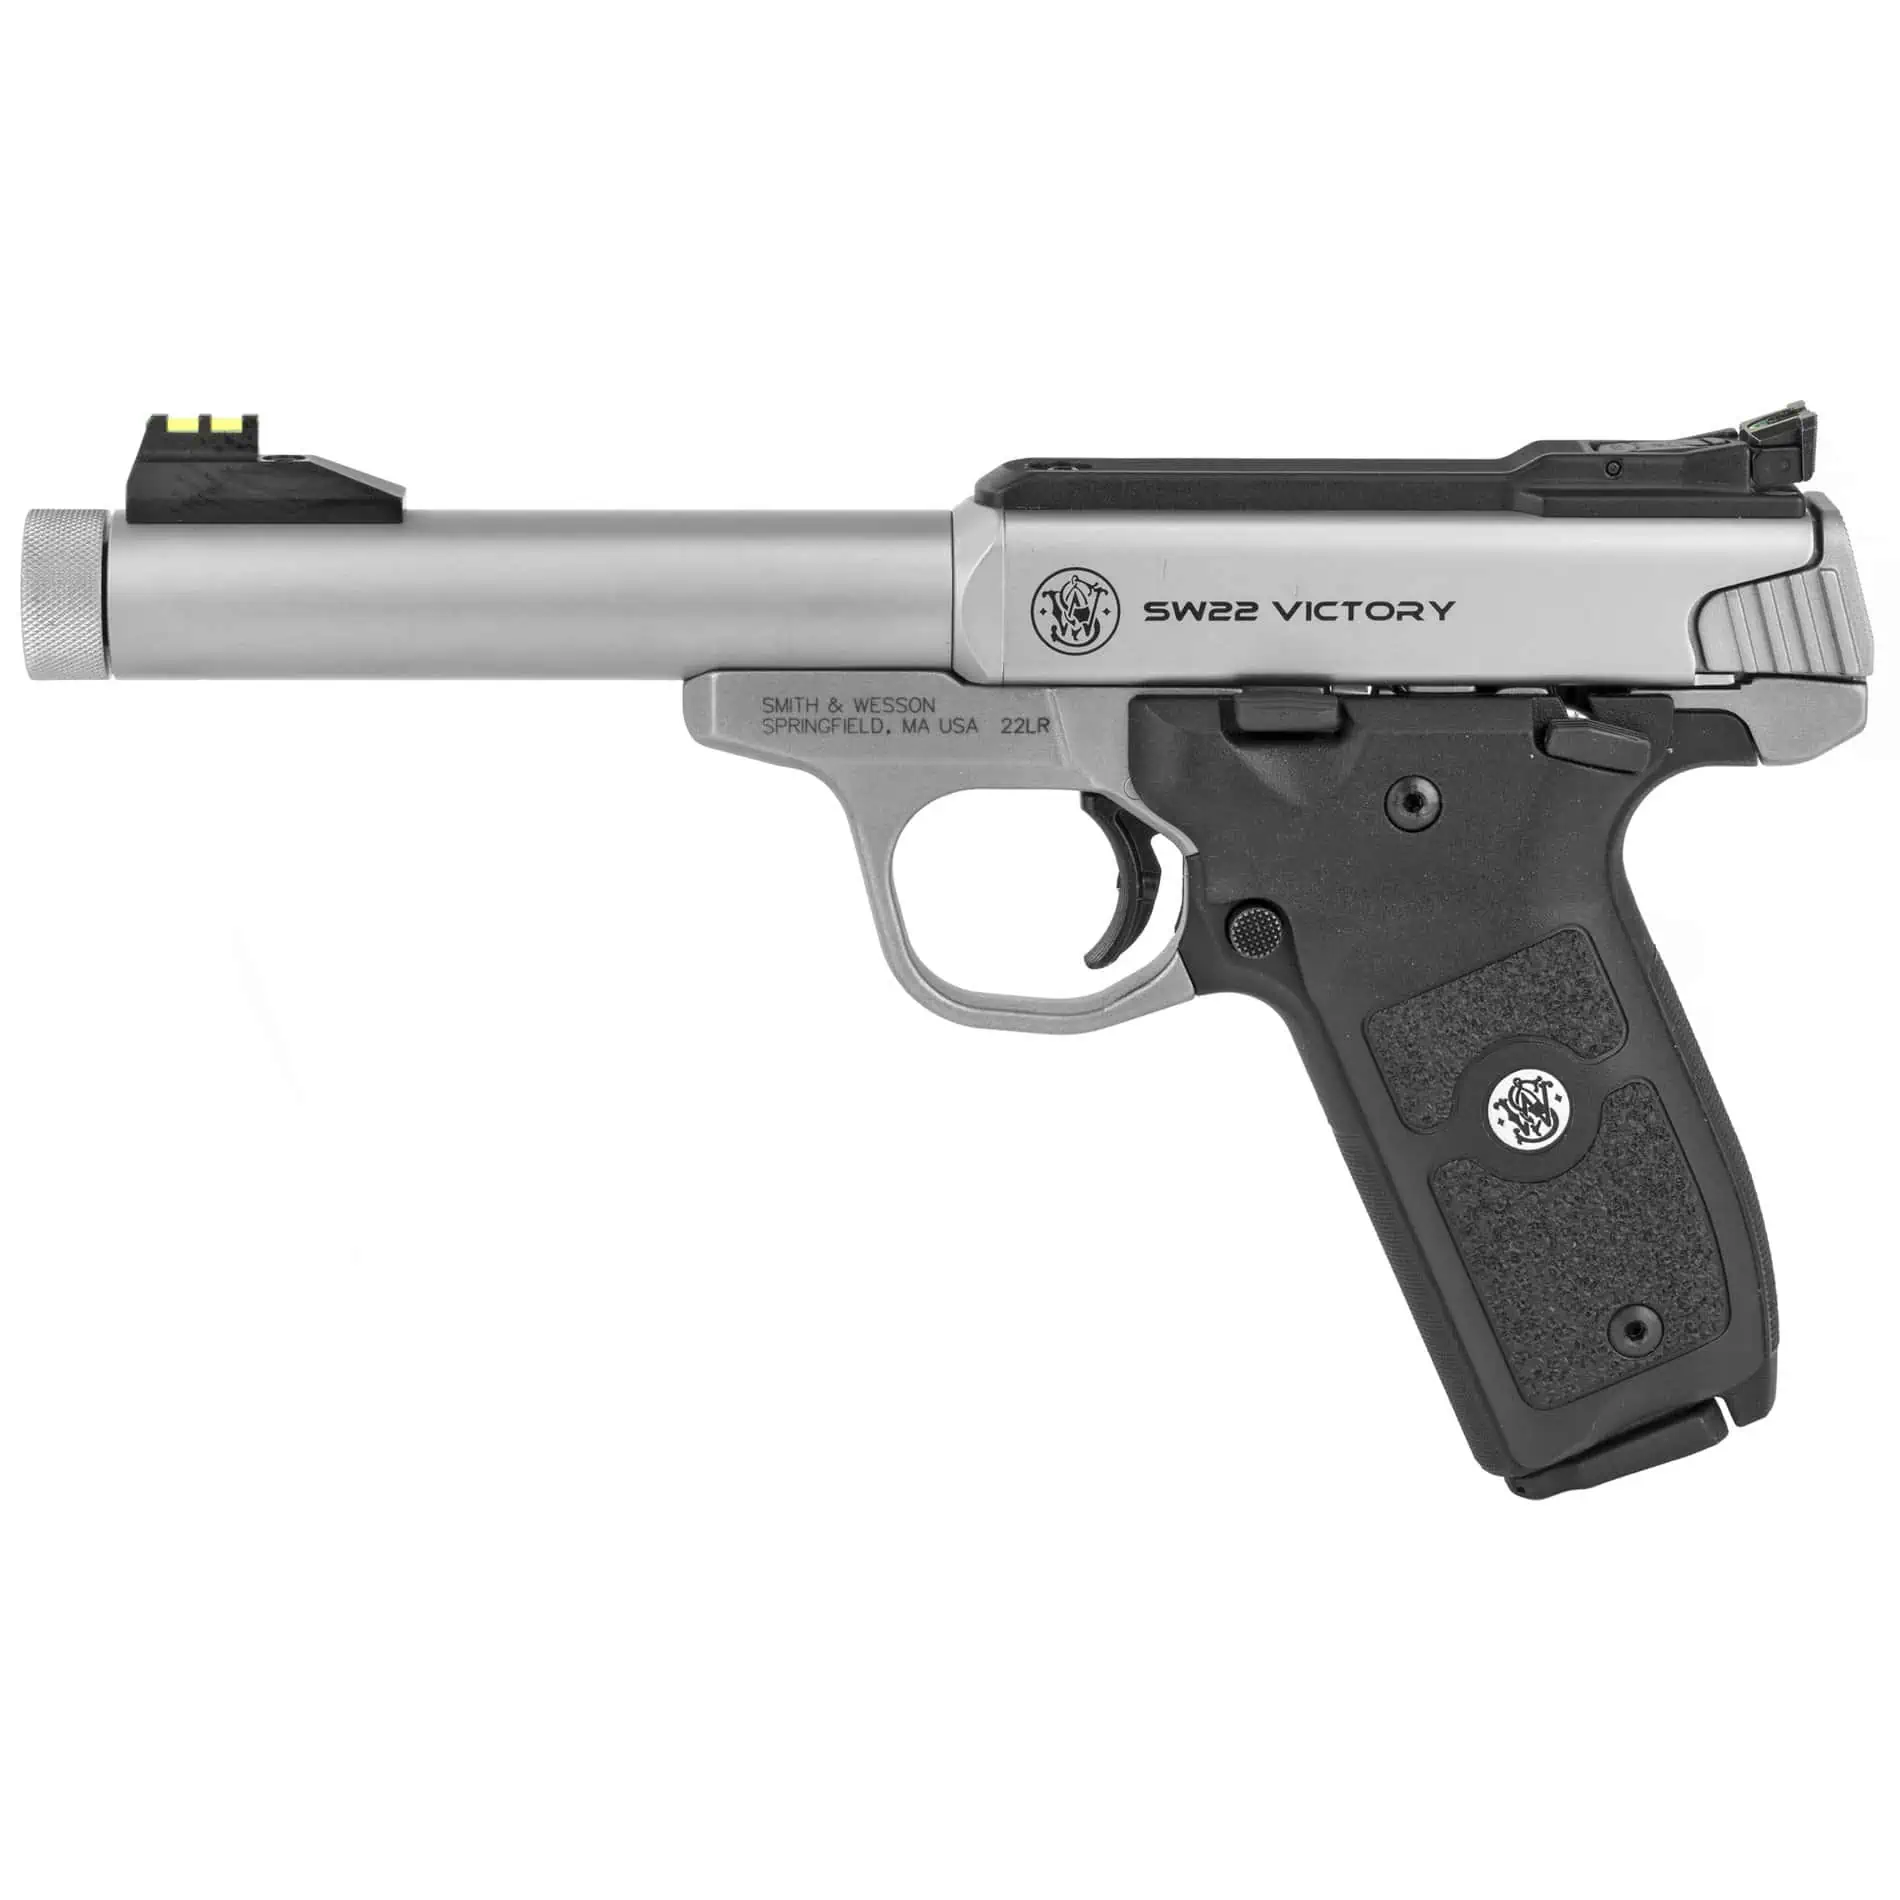 S&W Victory 22LR 5.5" Pistol -10 Round - Stainless - Threaded Barrel